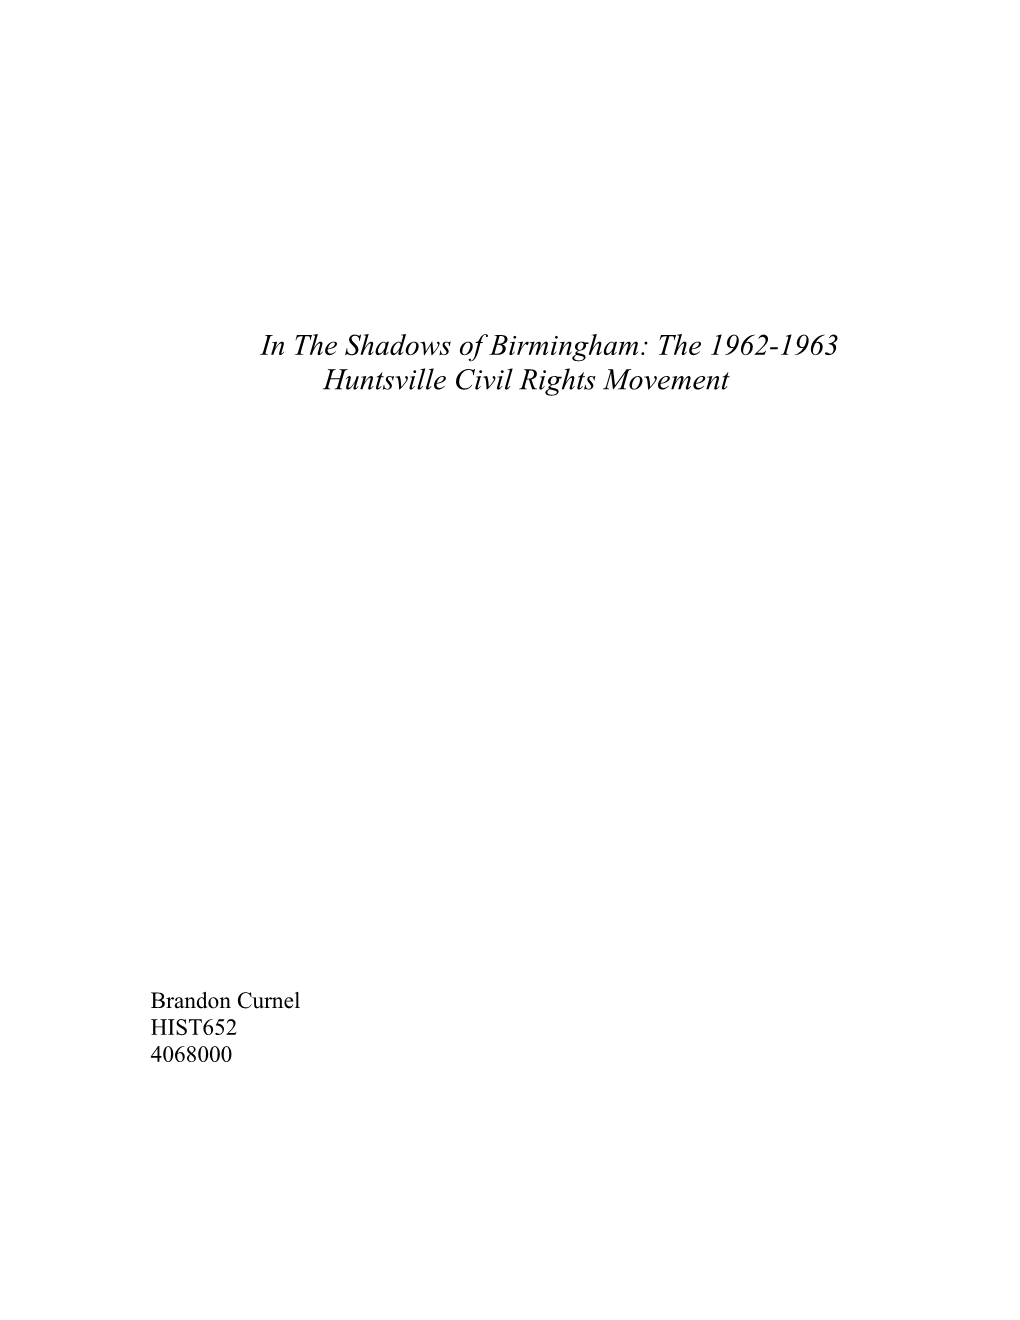 In the Shadows of Birmingham: the 1962-1963 Huntsville Civil Rights Movement